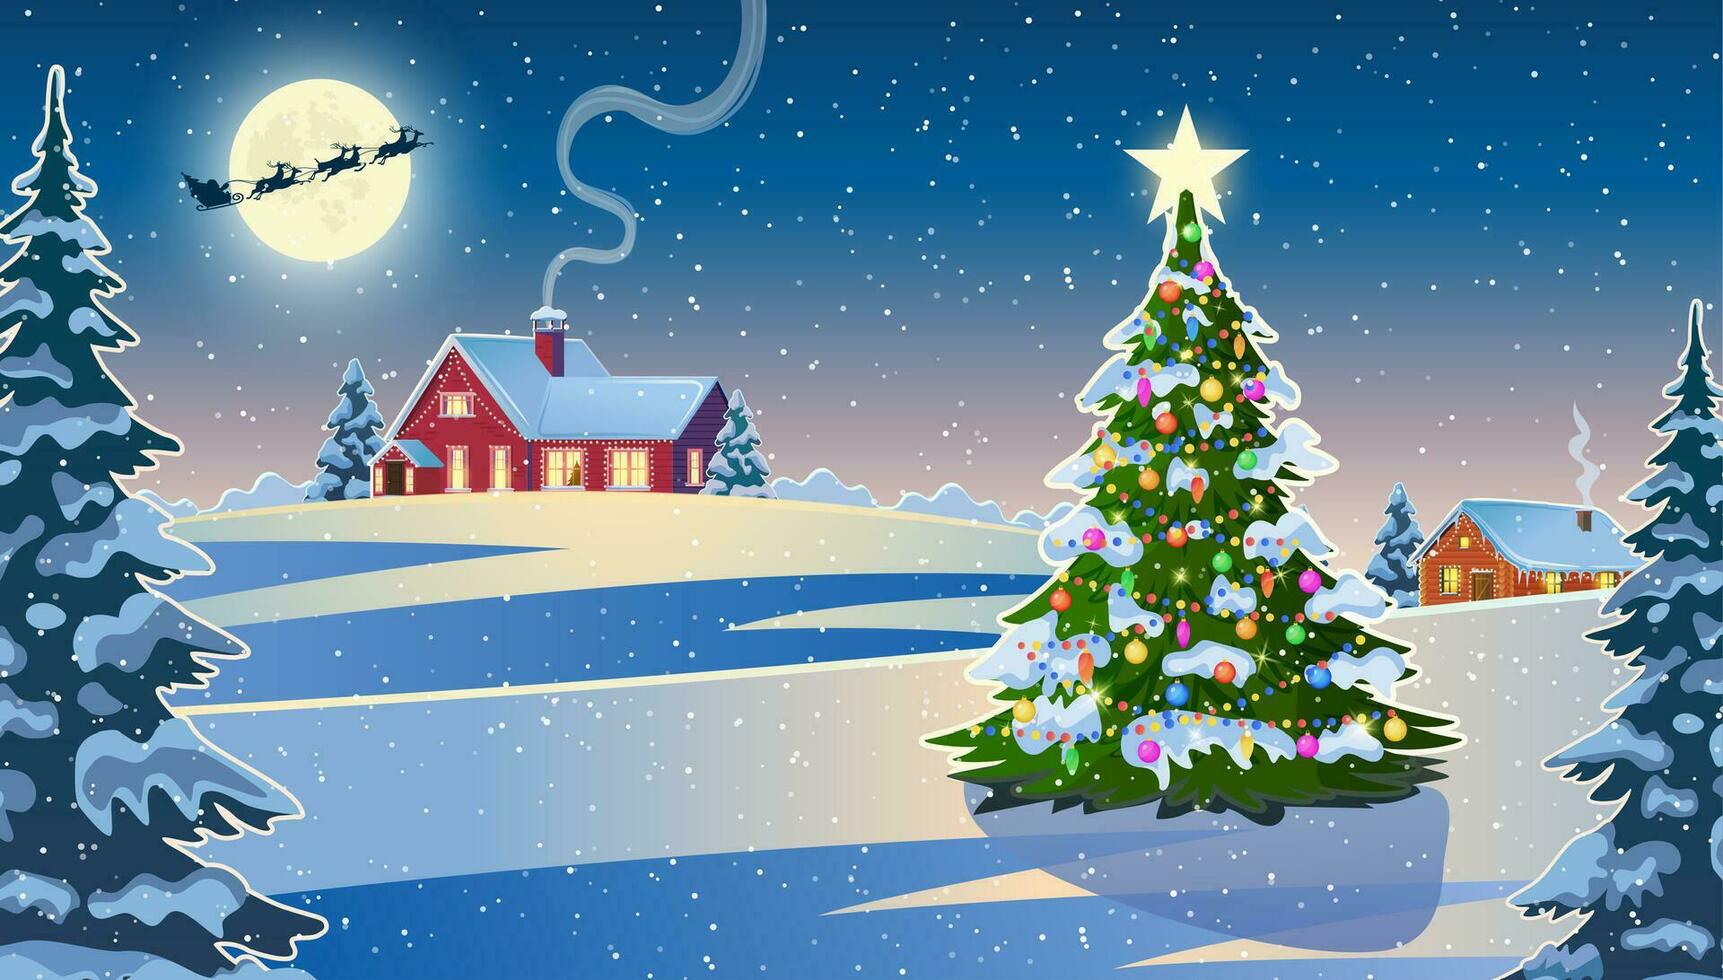 Winter snow landscape and houses with christmas tree. concept for greeting or postal card. background with moon and the silhouette of Santa Claus flying on a sleigh. vector illustration.